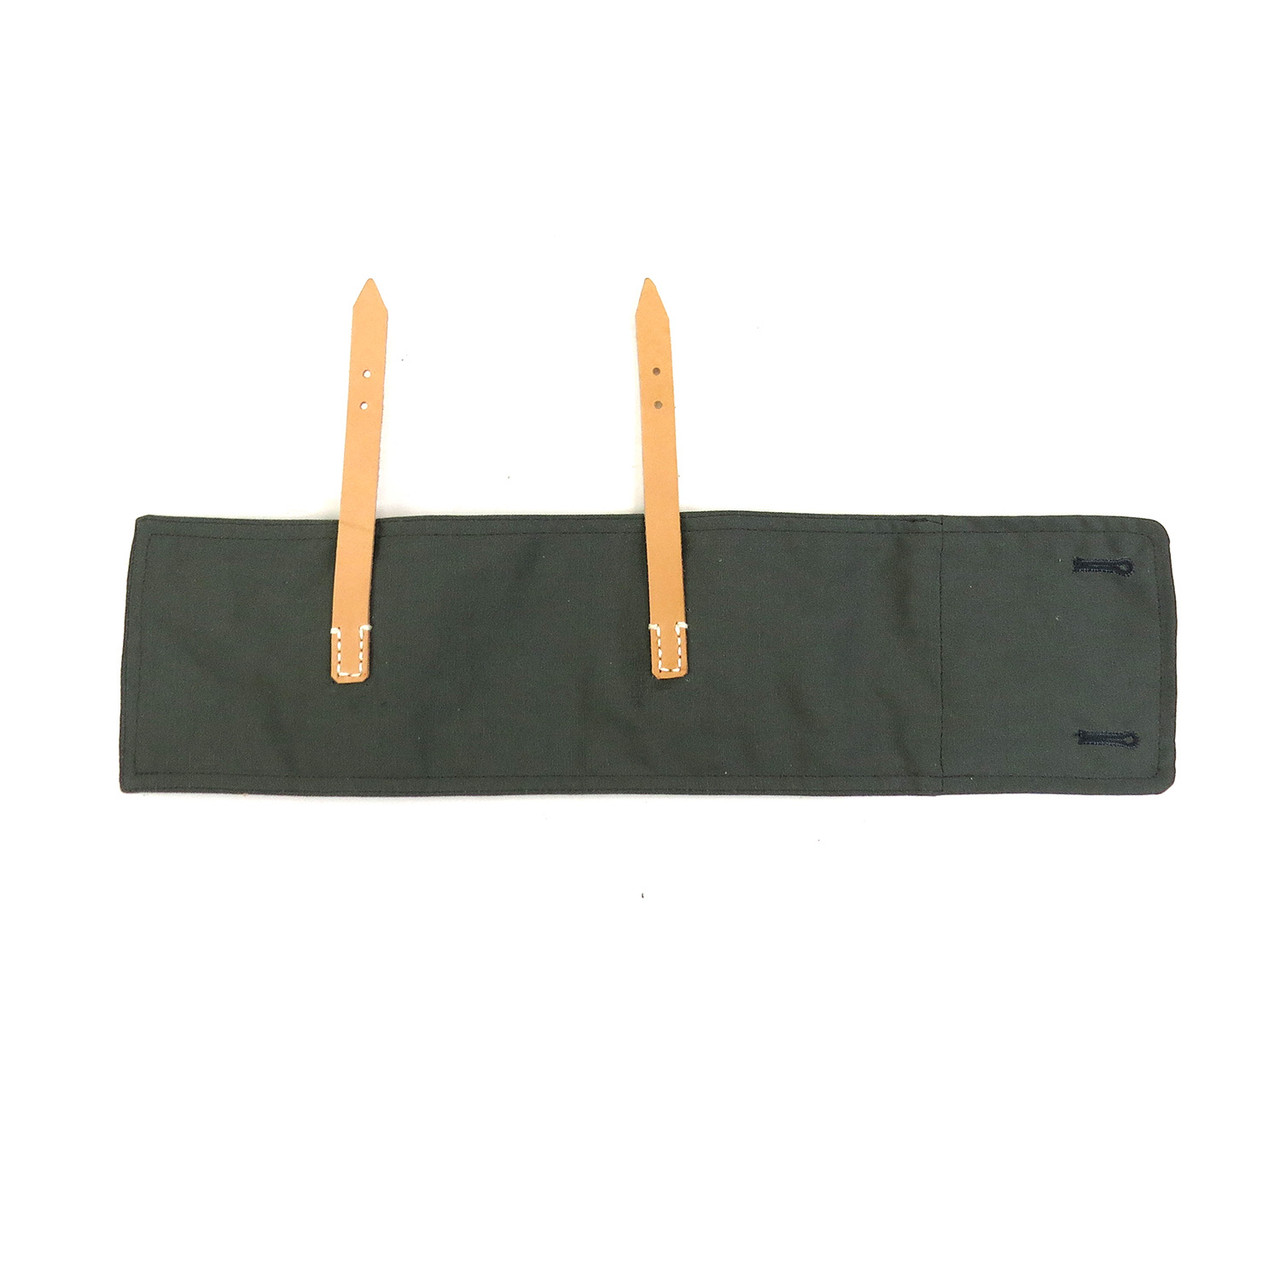 Repro WWII Zeltbahn Poles and Stake Bag